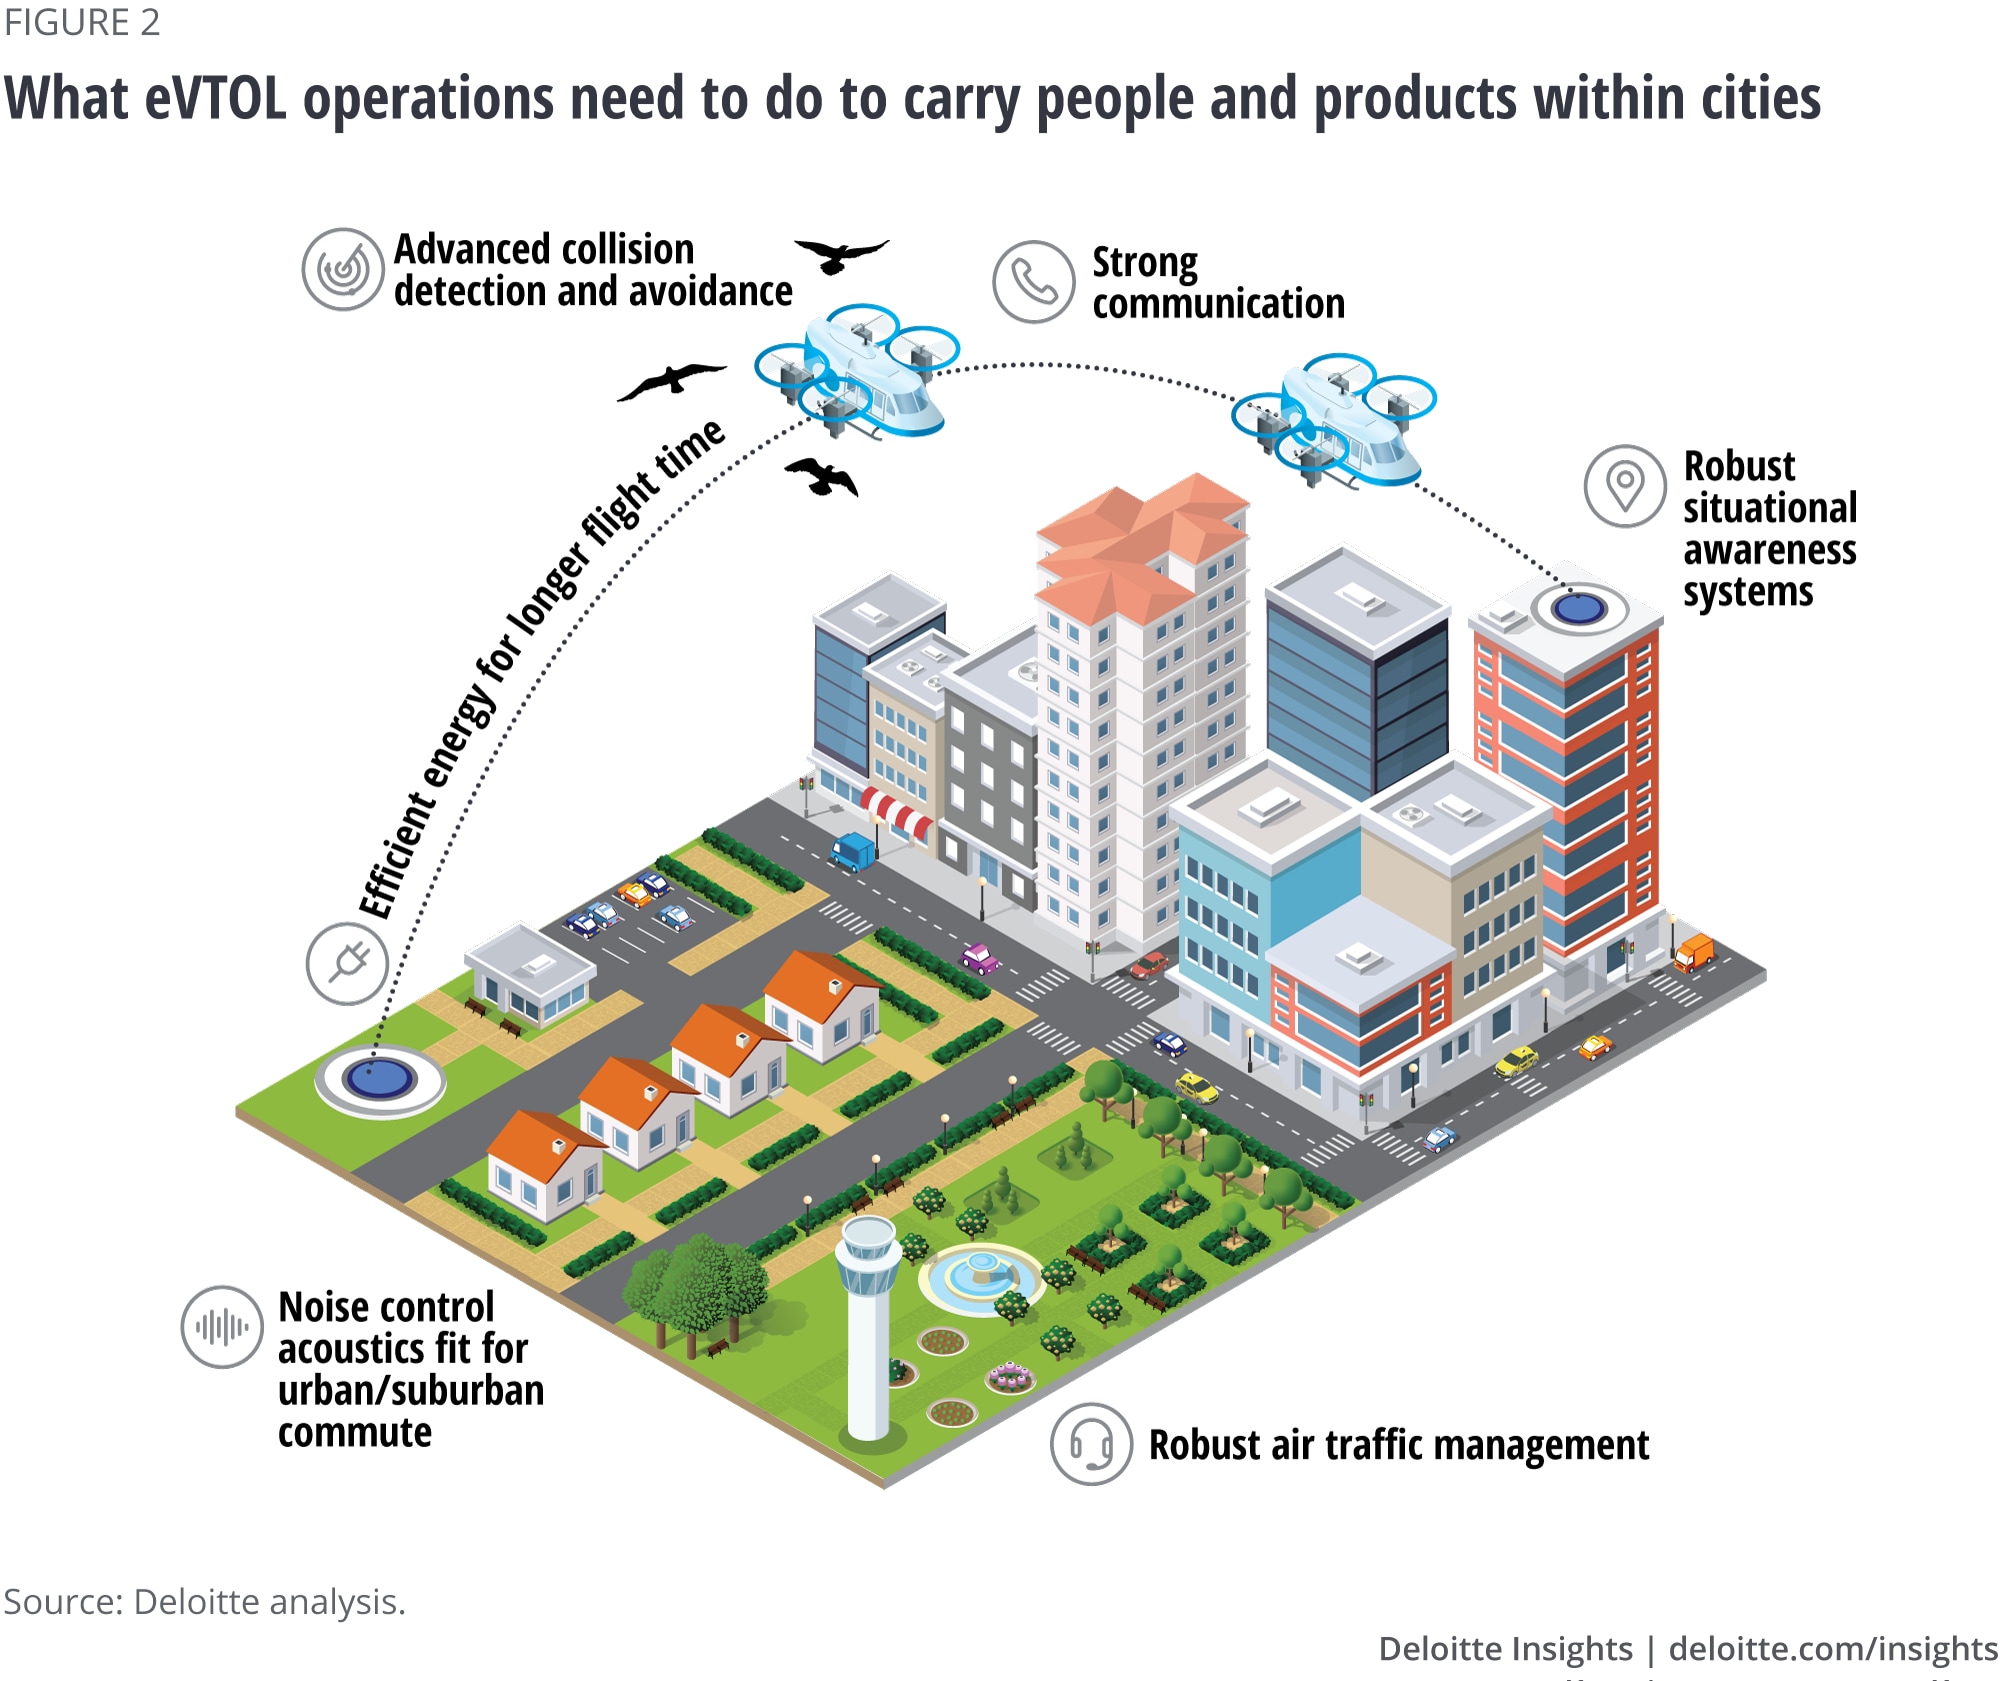 What eVTOL operations need to do to carry people and products within cities